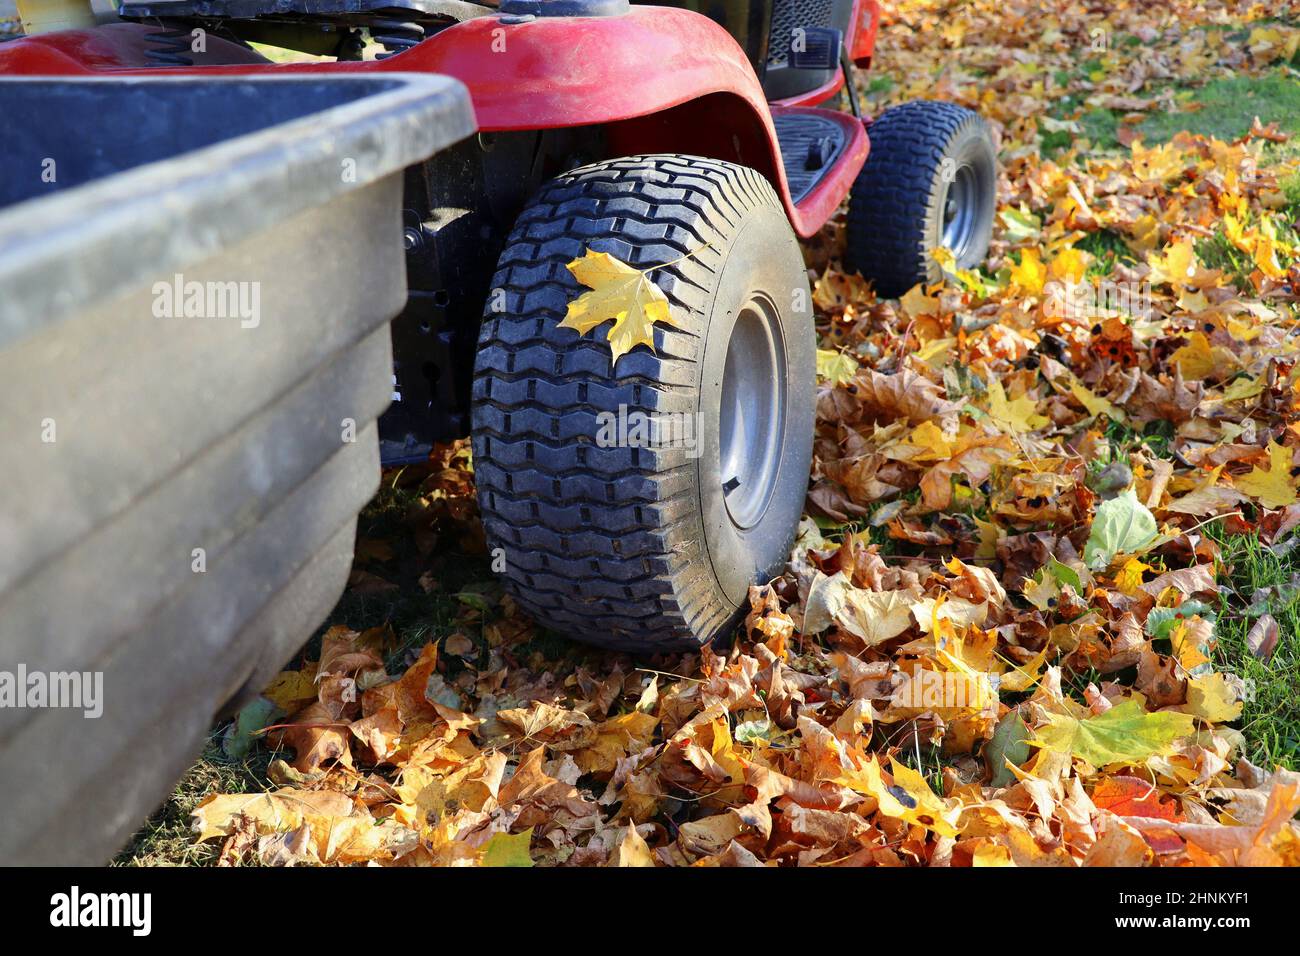 Red riding lawn mower with big container in garden. Concept gardening, mowing, work at outside in autumn Stock Photo